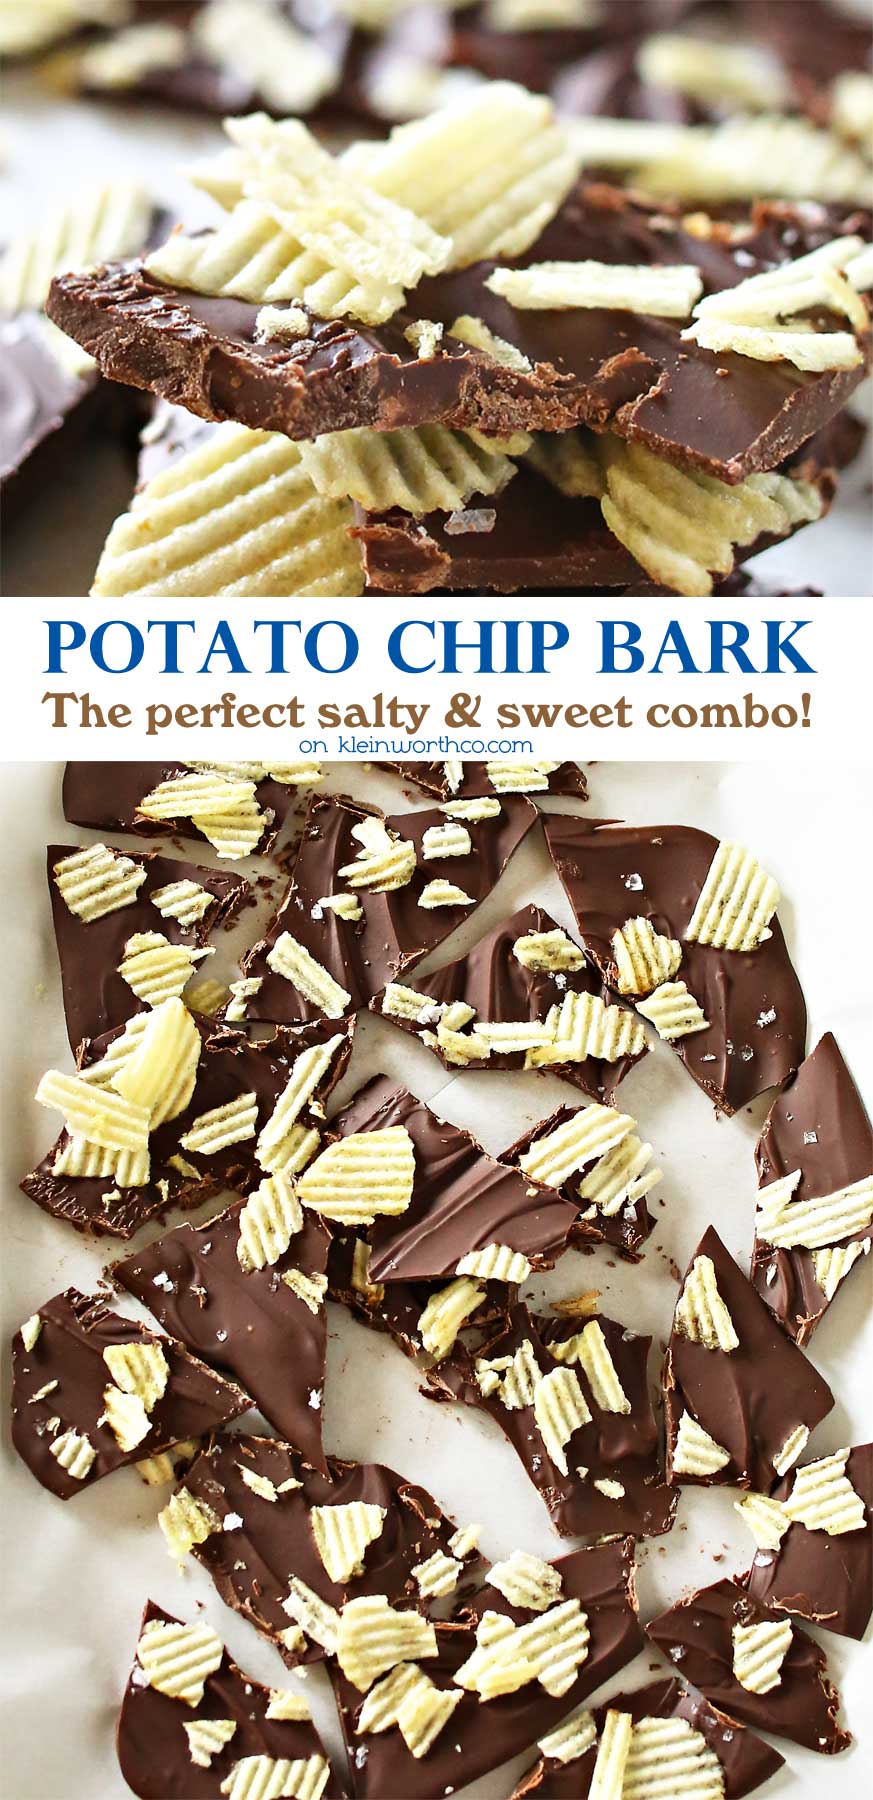 If you are a lover of salty & sweet then this Potato Chip Bark is your perfect easy dessert recipe. Chocolate & potato chips make a tasty treat. I'm telling you- bark recipes top the easy list. But then adding salty potato chips makes it over the top delicious too. Creamy sweet chocolate & crunchy, salty potato chips is heavenly! 